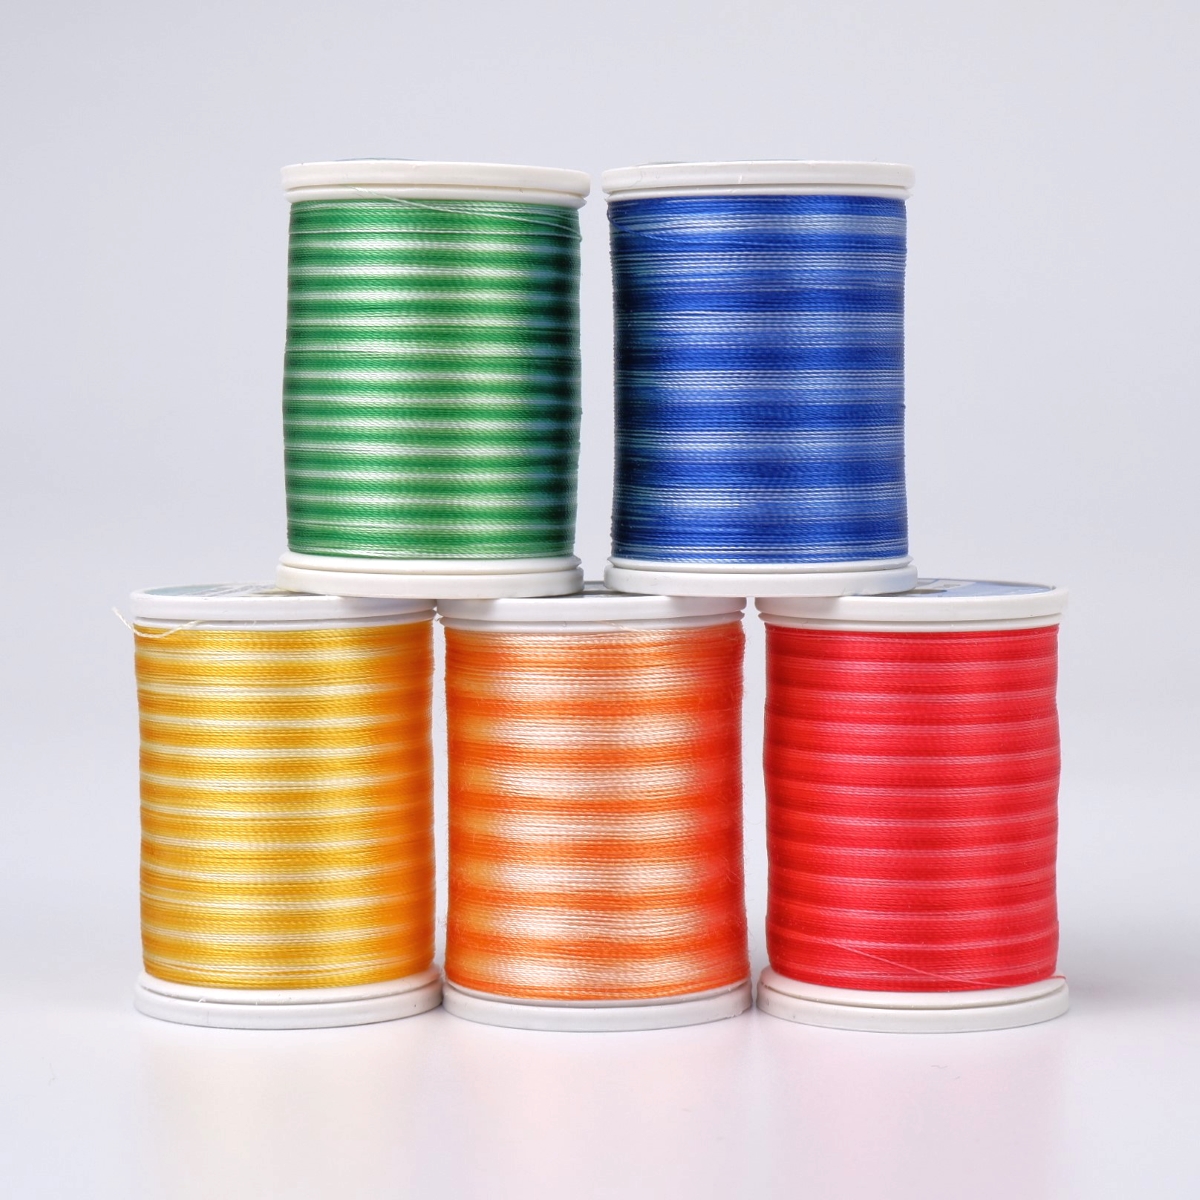 SULKY RAYON 40 - TOYS MULTICOLOR (5x
780m King Spools)